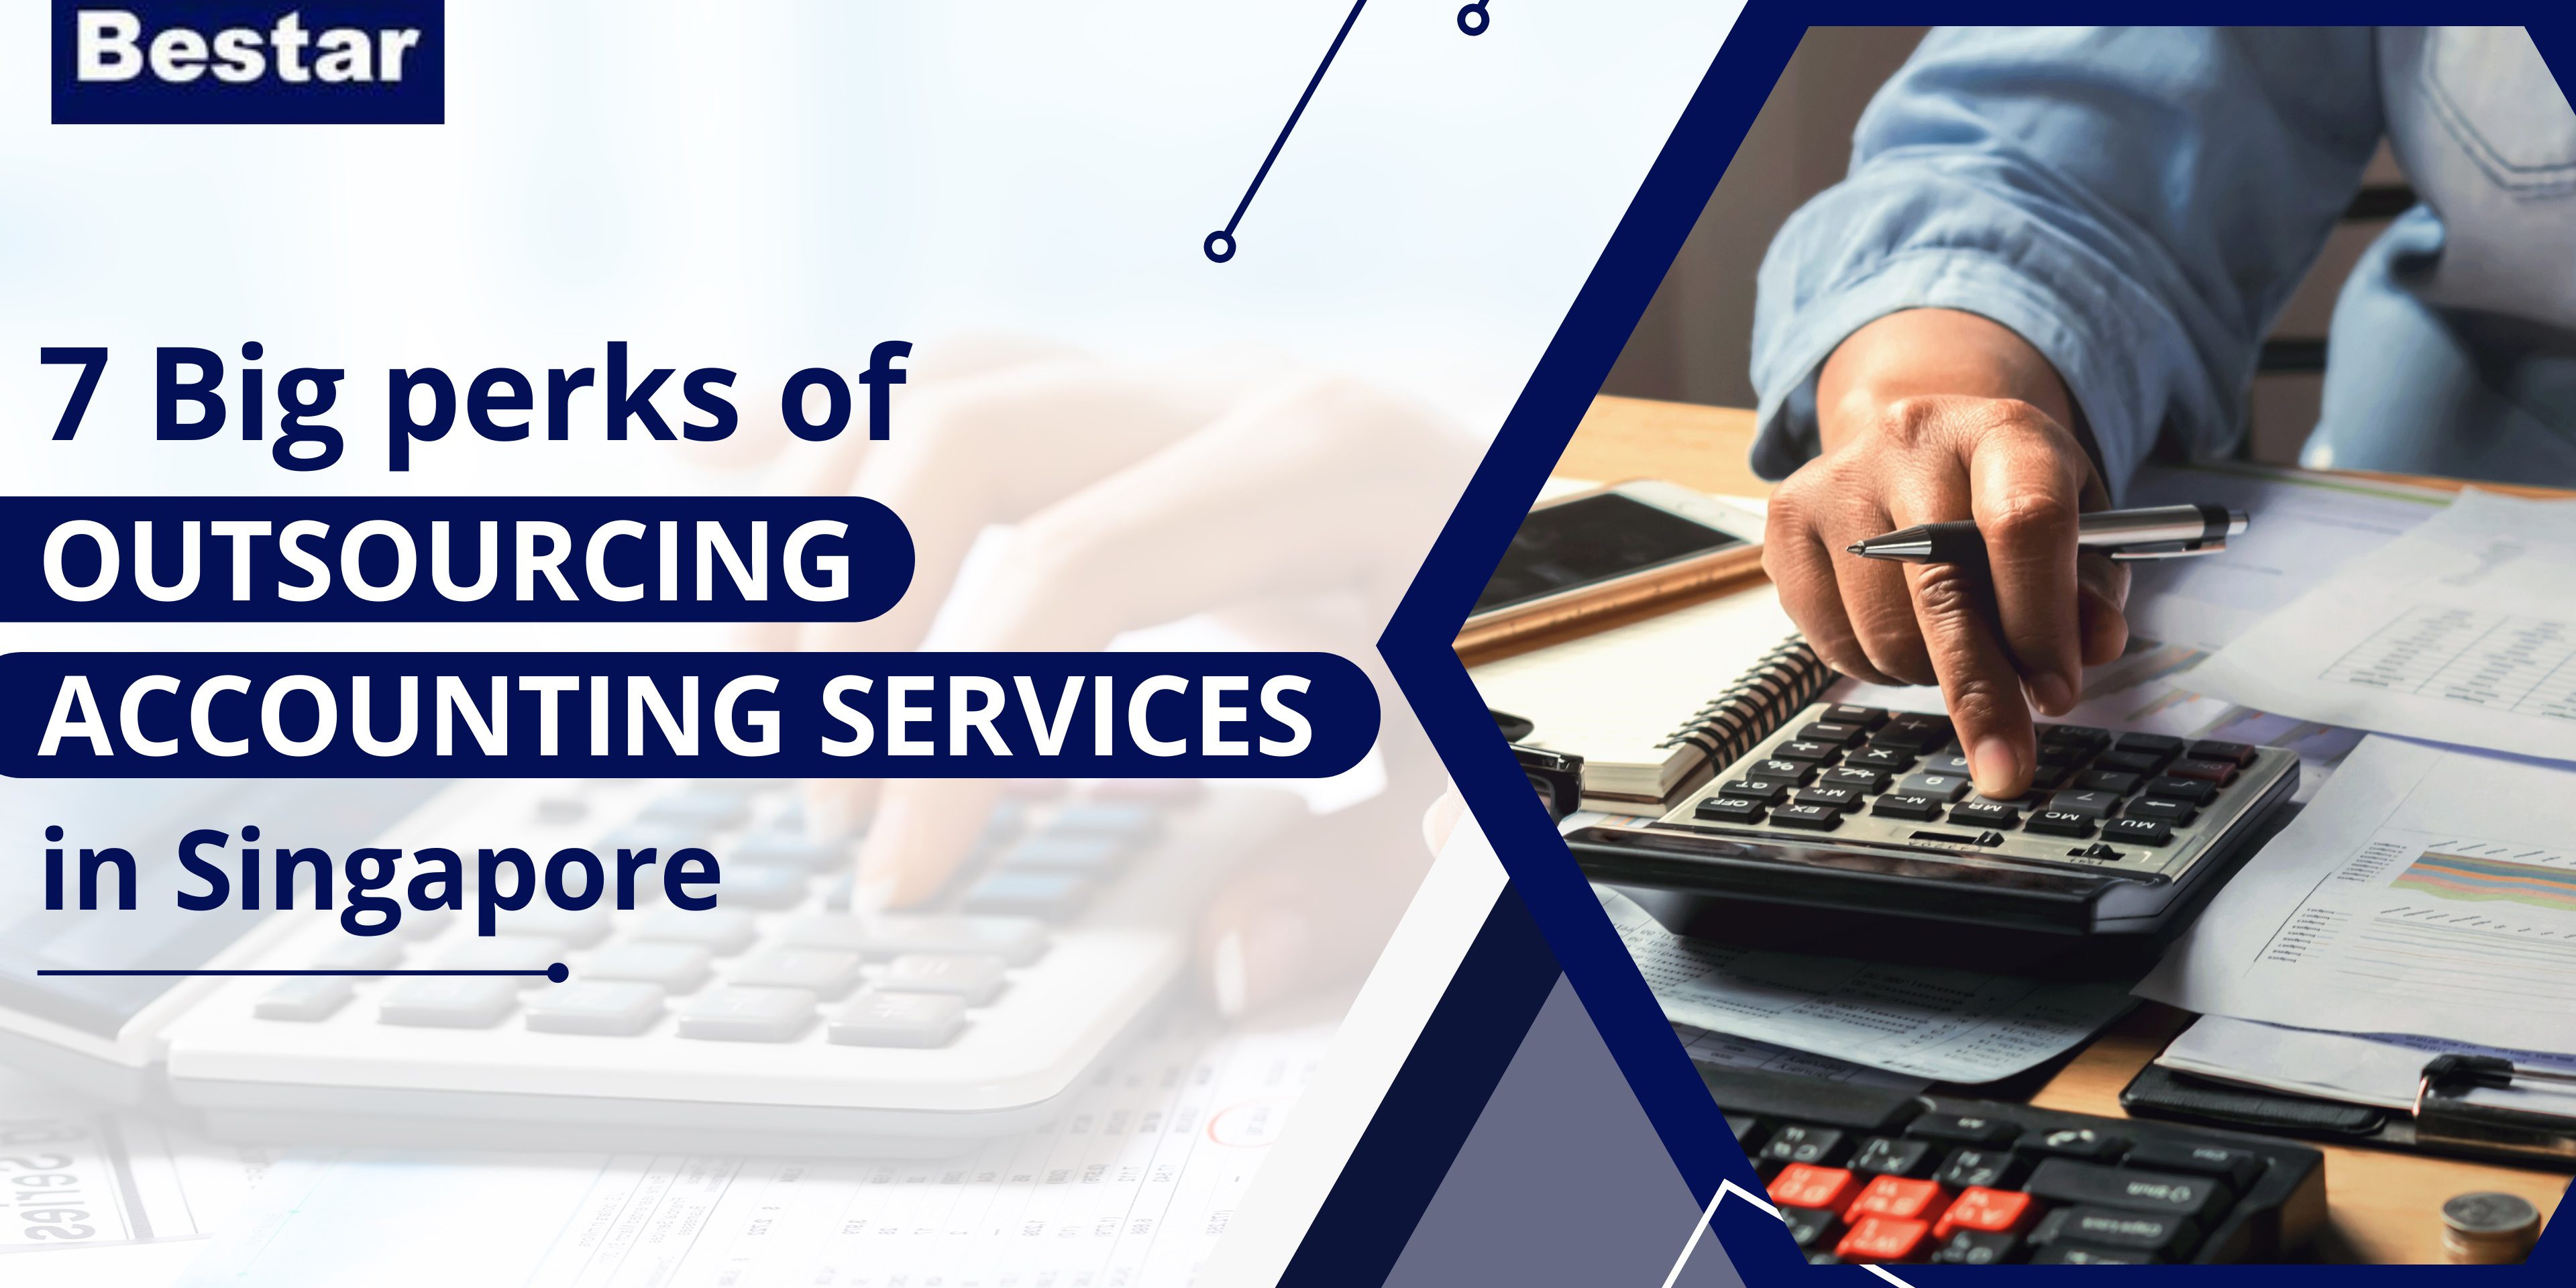 7 Big perks of Outsourcing Accounting Services in Singapore